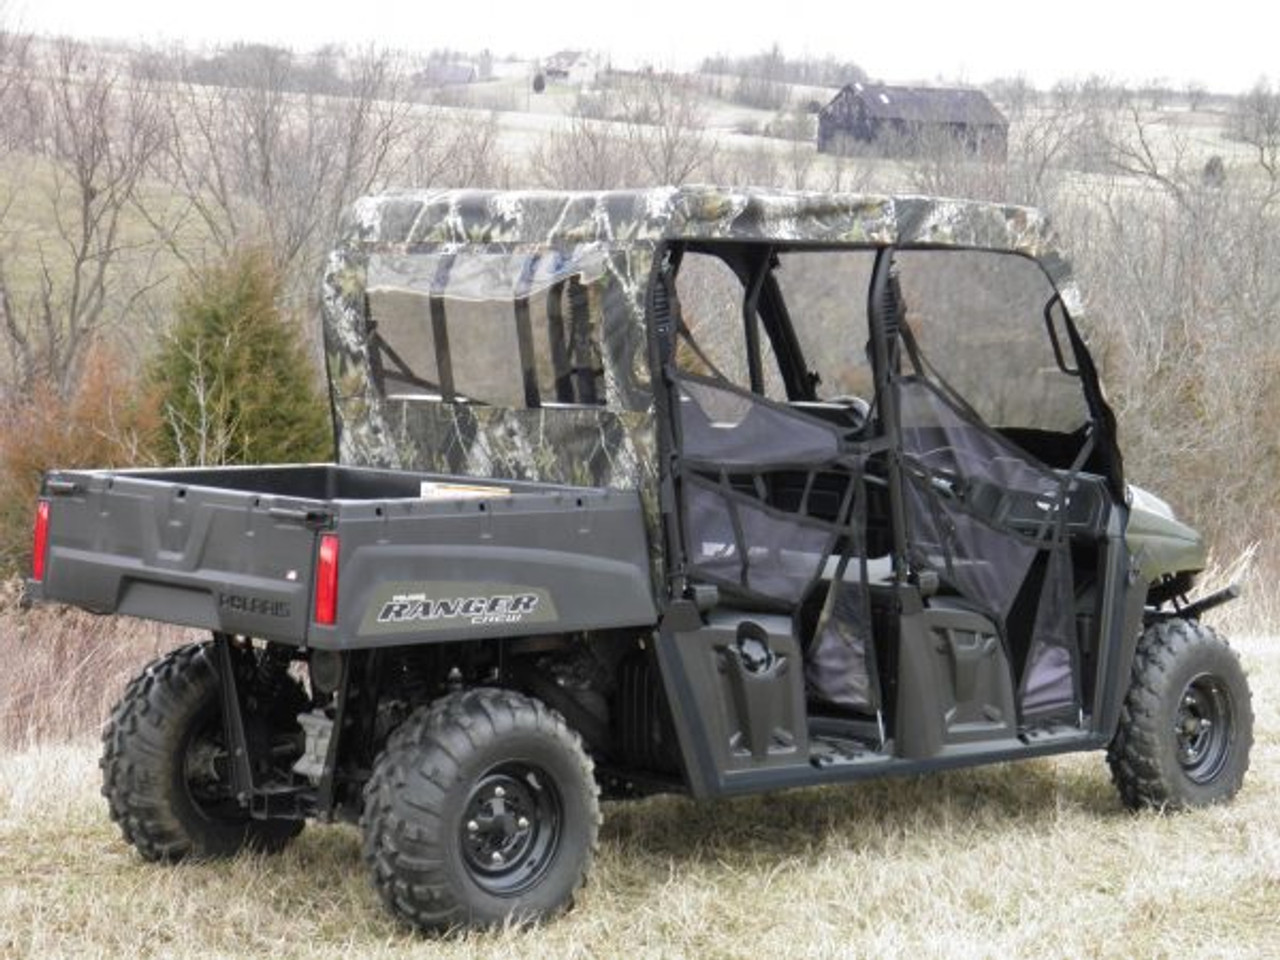 3 Star side x side Polaris Ranger Crew 570-6/800 vinyl windshield top and rear window rear and side angle view